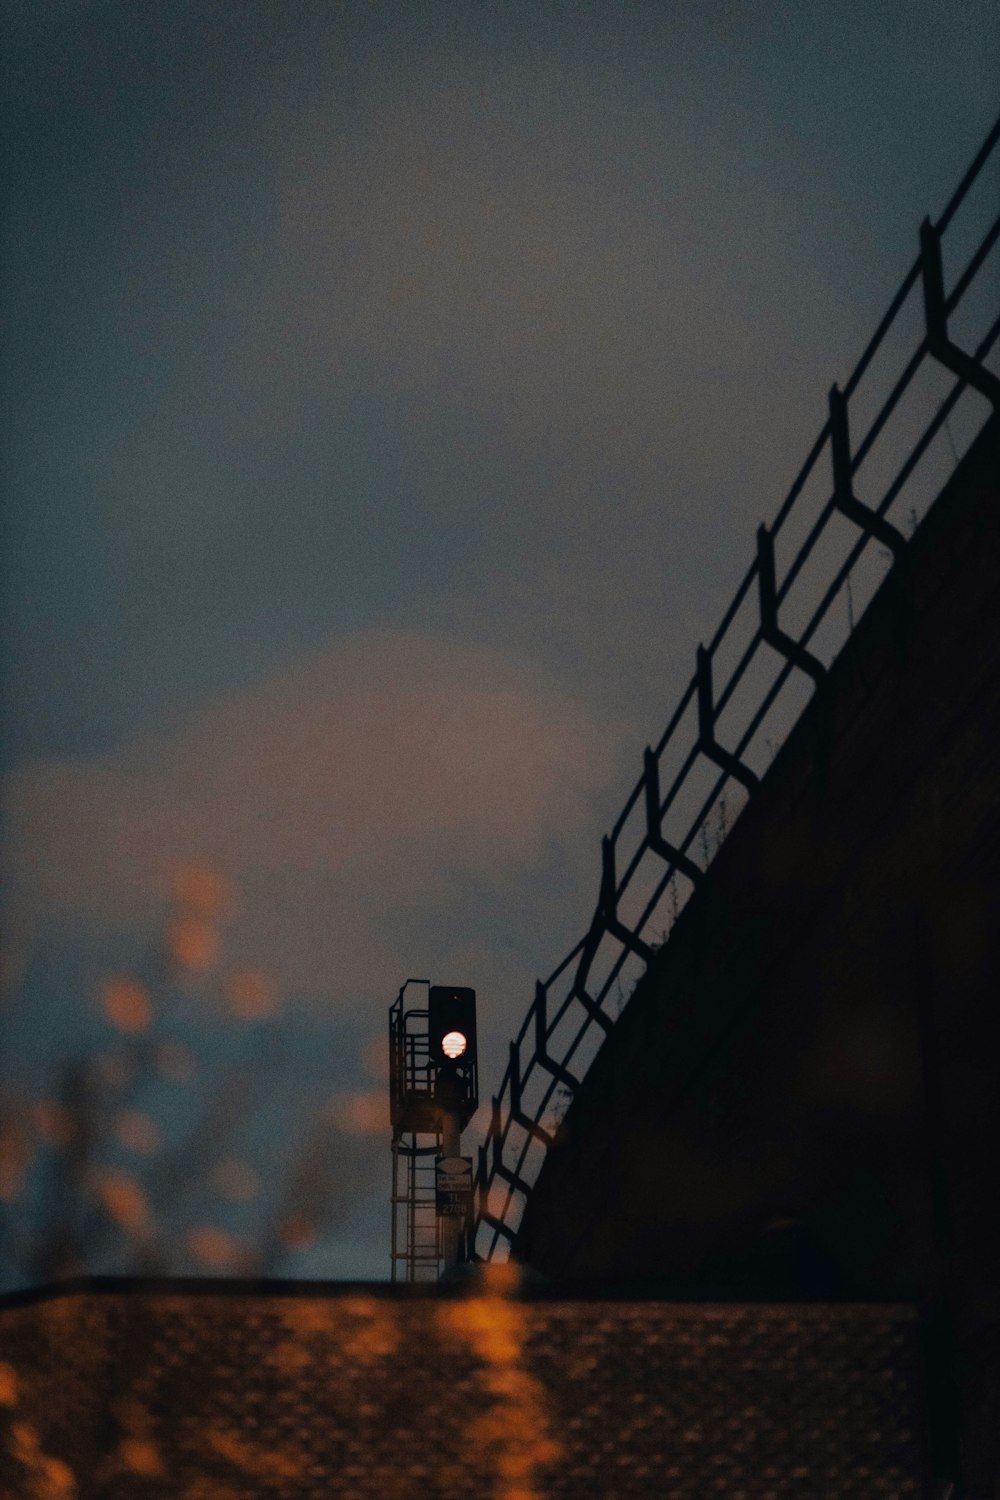 a traffic light sitting on the side of a bridge